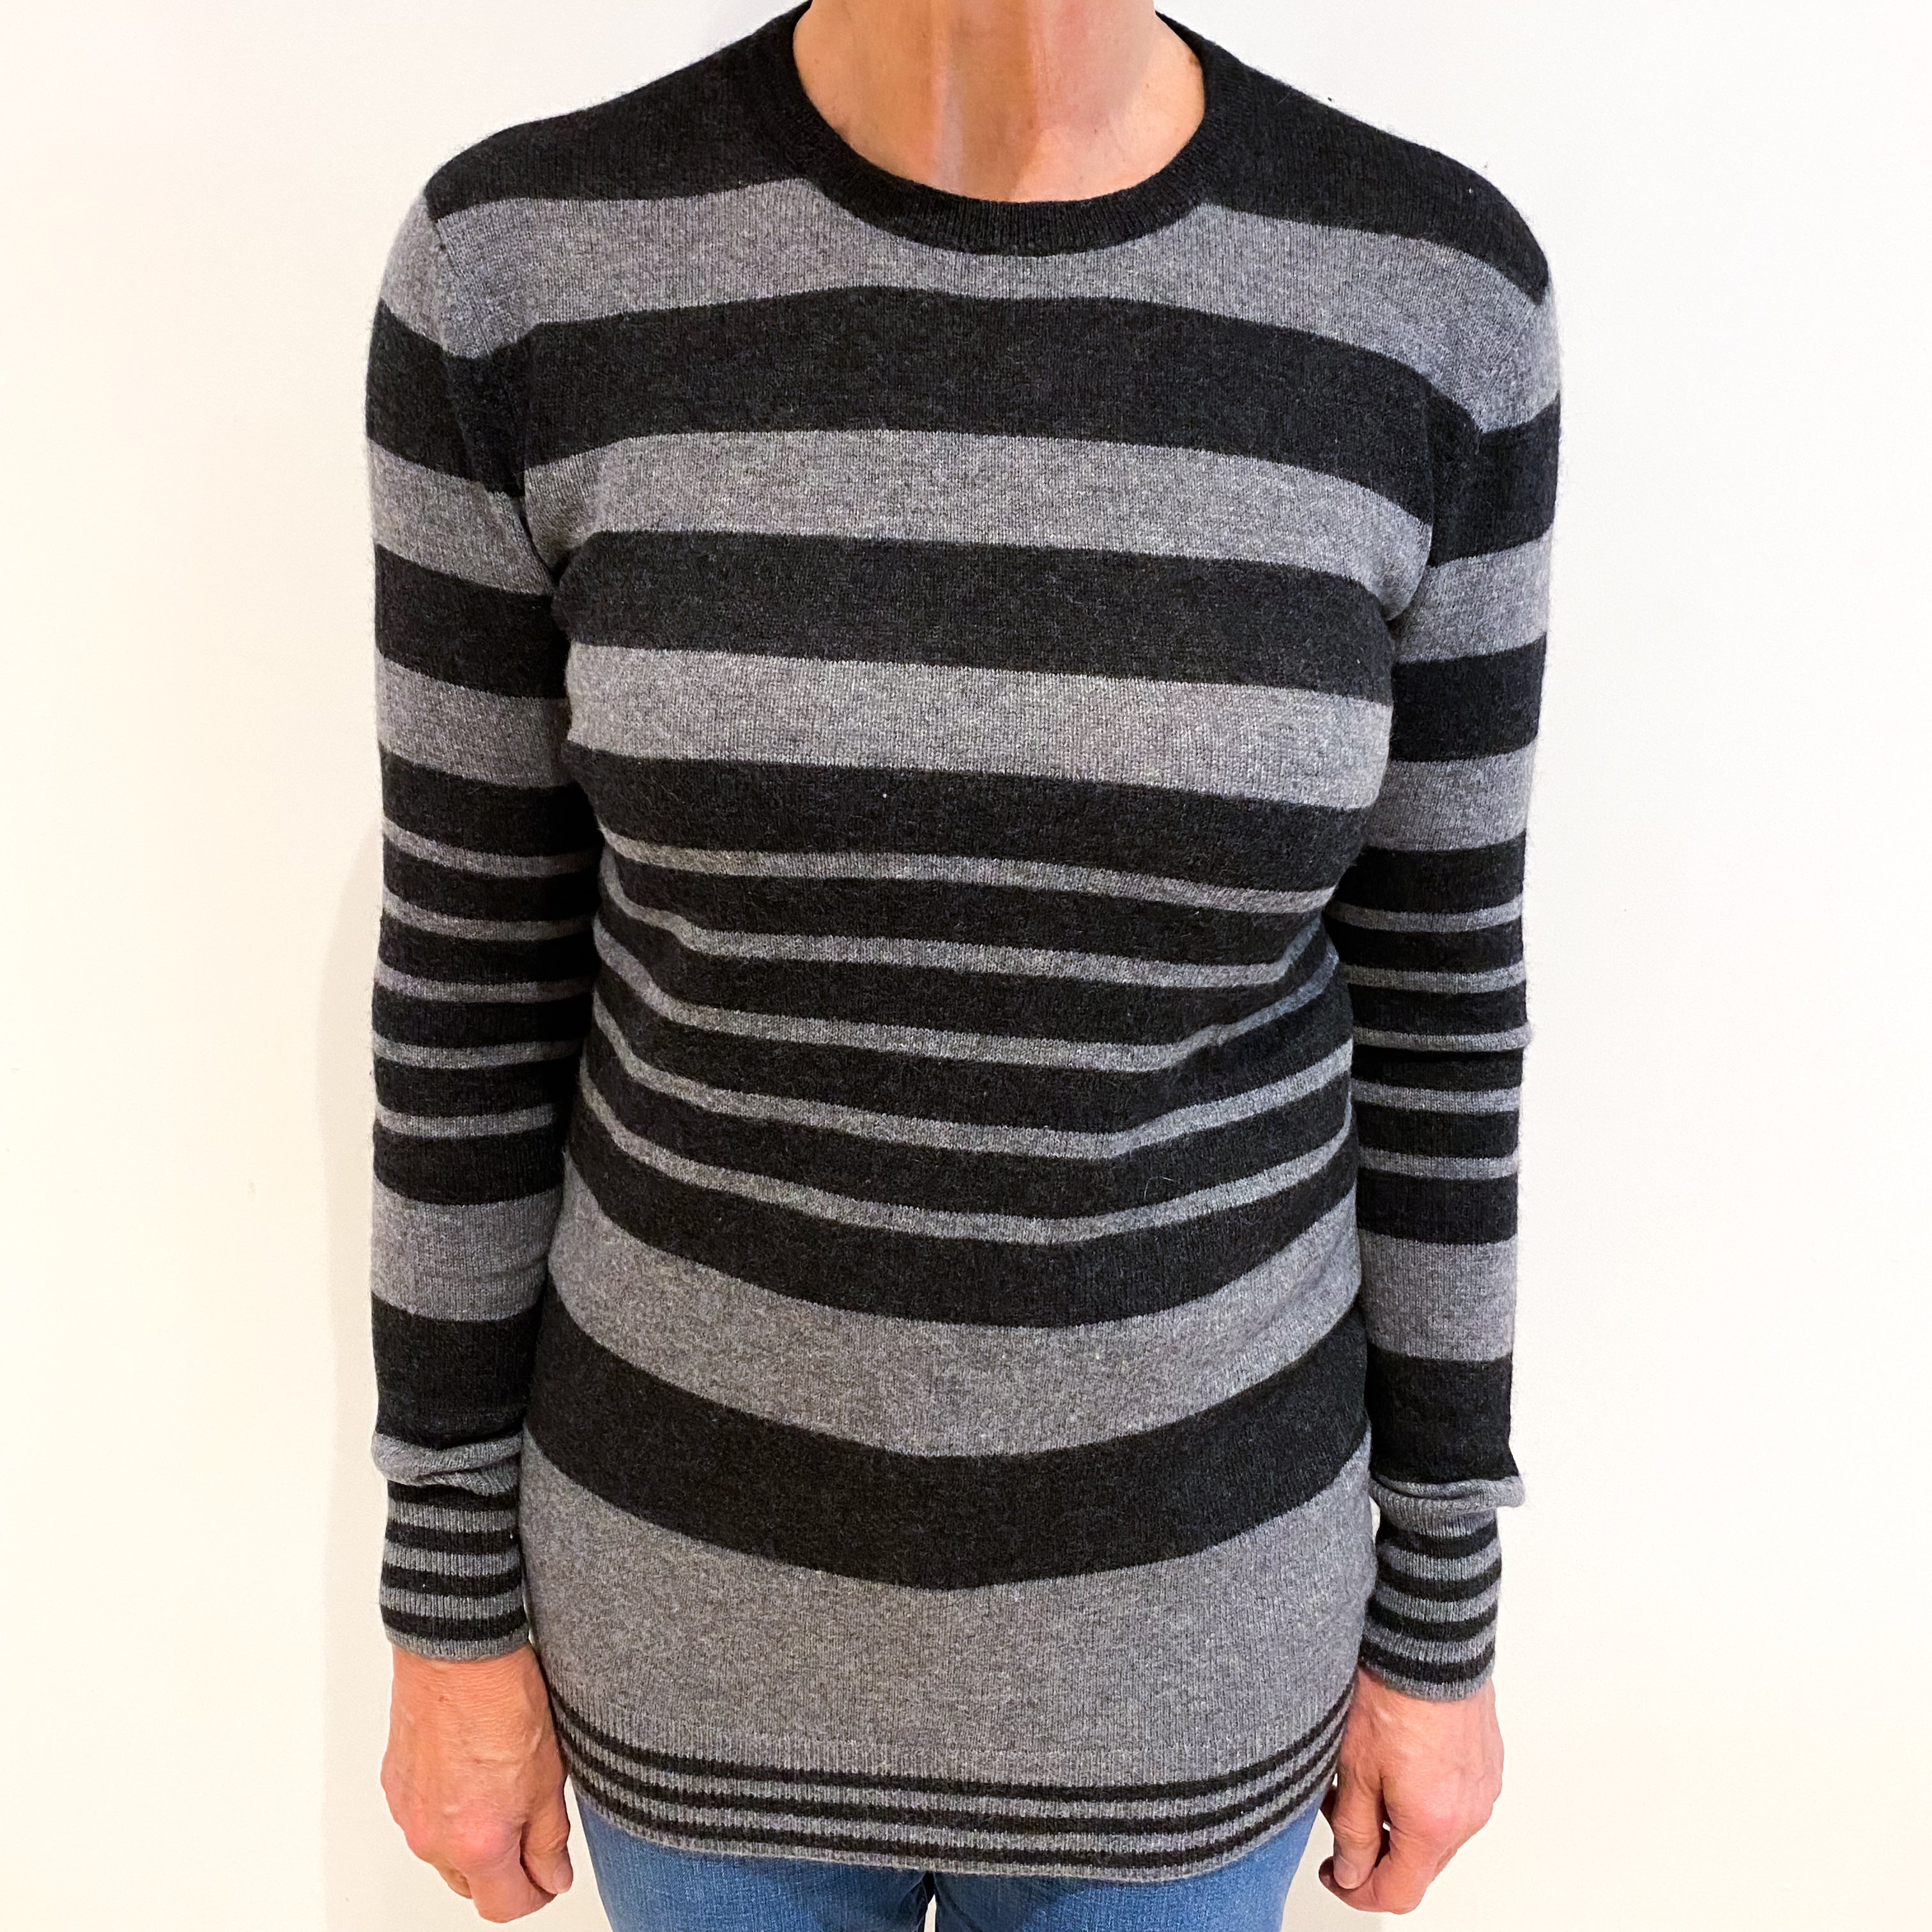 Charcoal And Slate Grey Striped Cashmere Crew Neck Jumper Medium